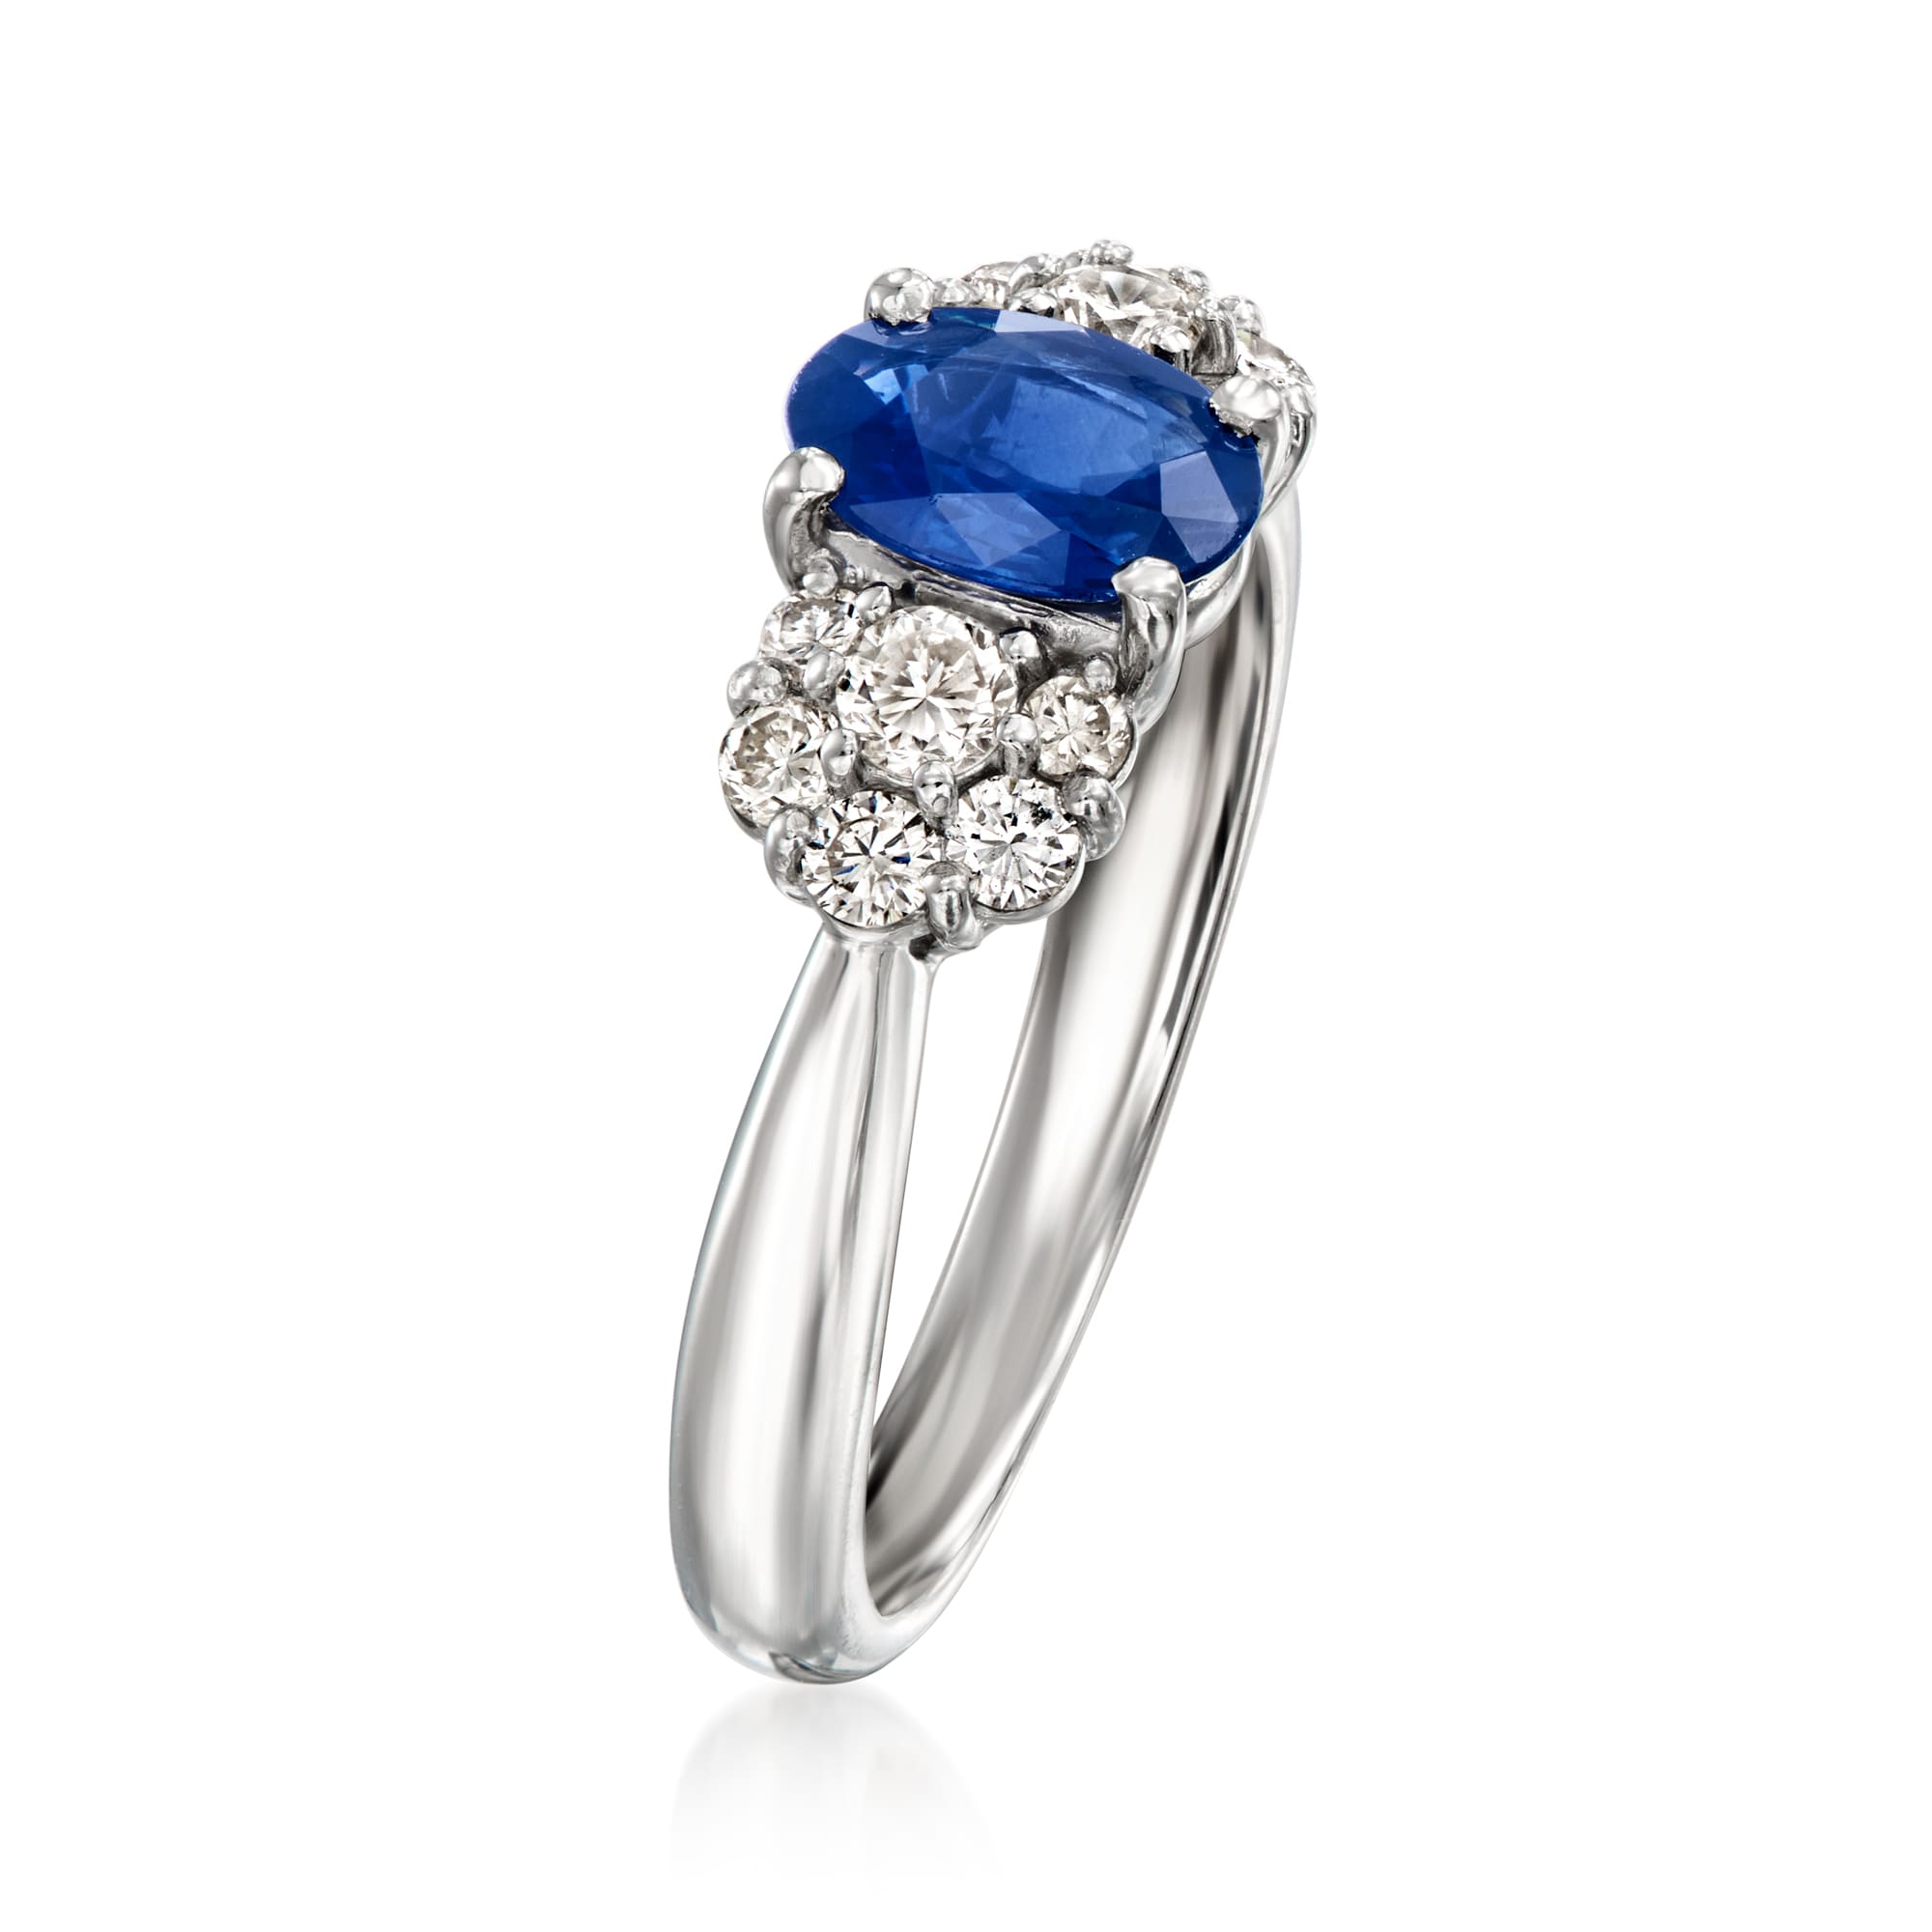 C. 1990 Vintage .79 Carat Sapphire and .40 ct. t.w. Diamond Ring in  Platinum. Size 6